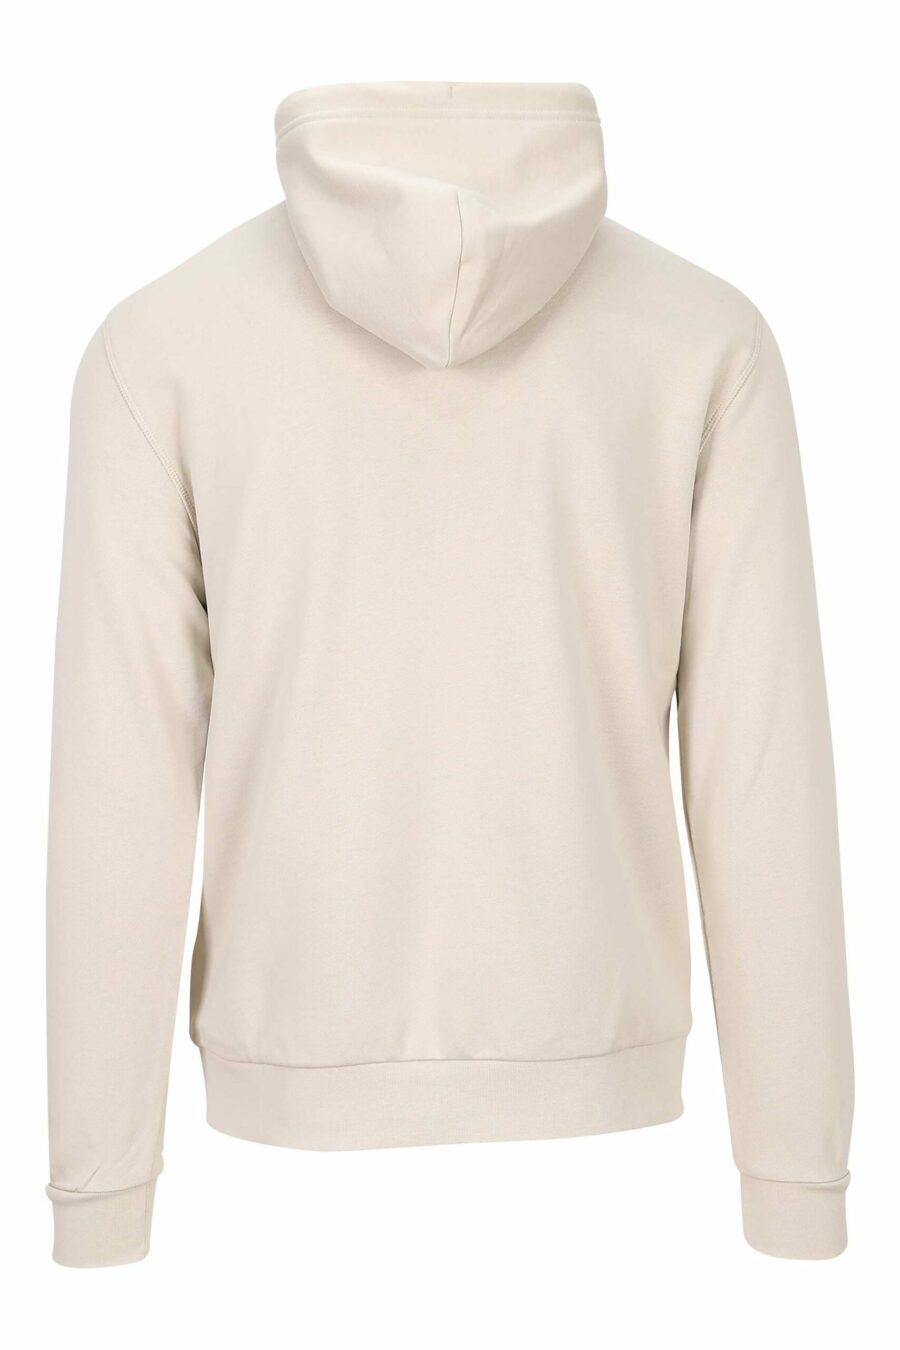 Beige hooded sweatshirt with minilogo centred label "lux identity" - 8057767684006 1 scaled